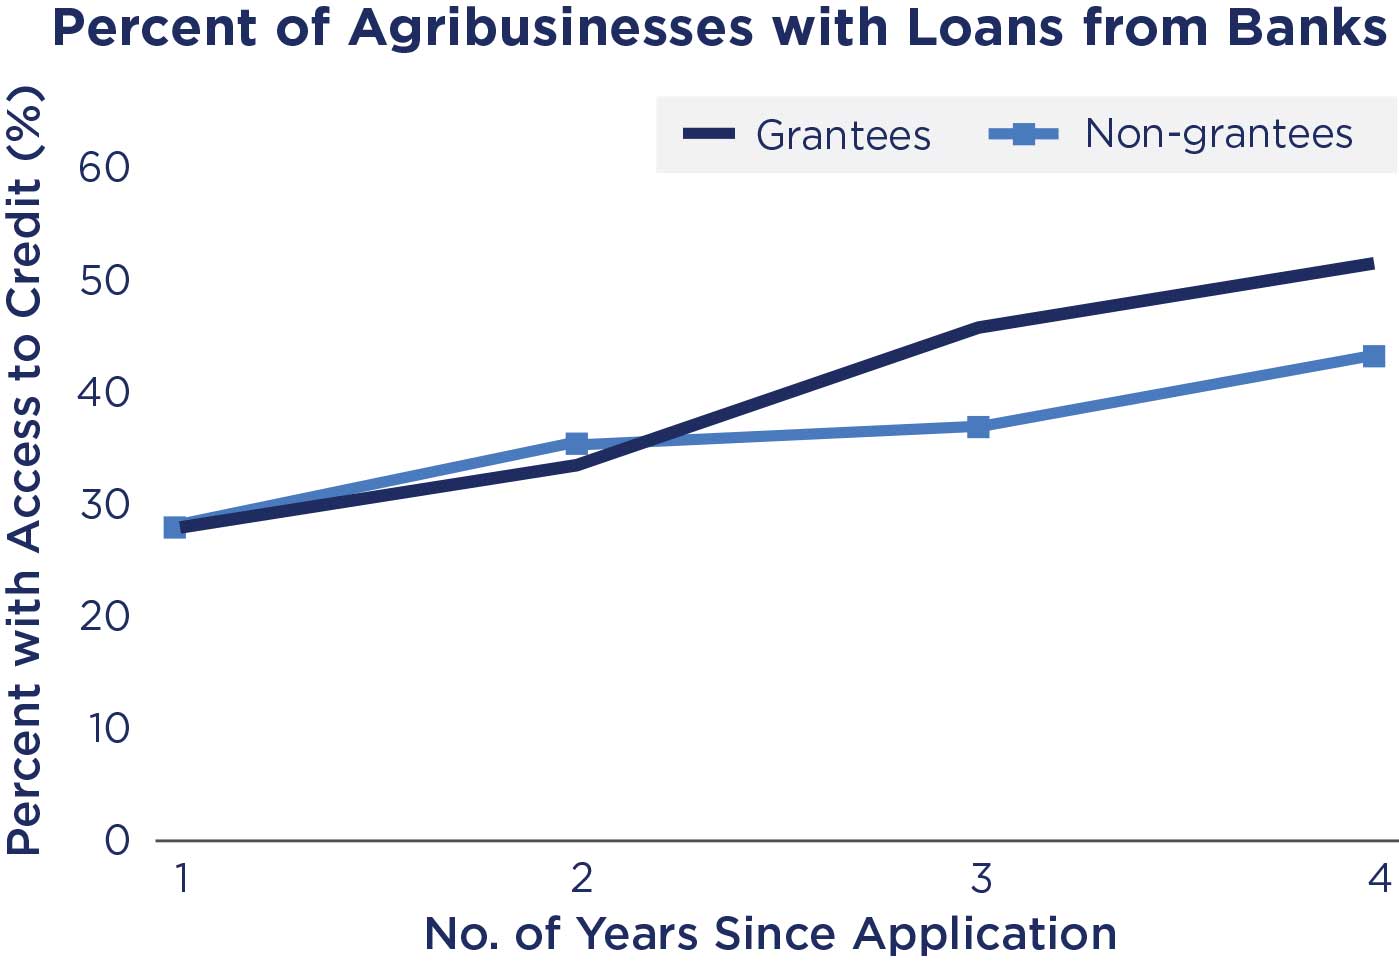 Chart of the Percent of Agribusinesses with Loans from Banks